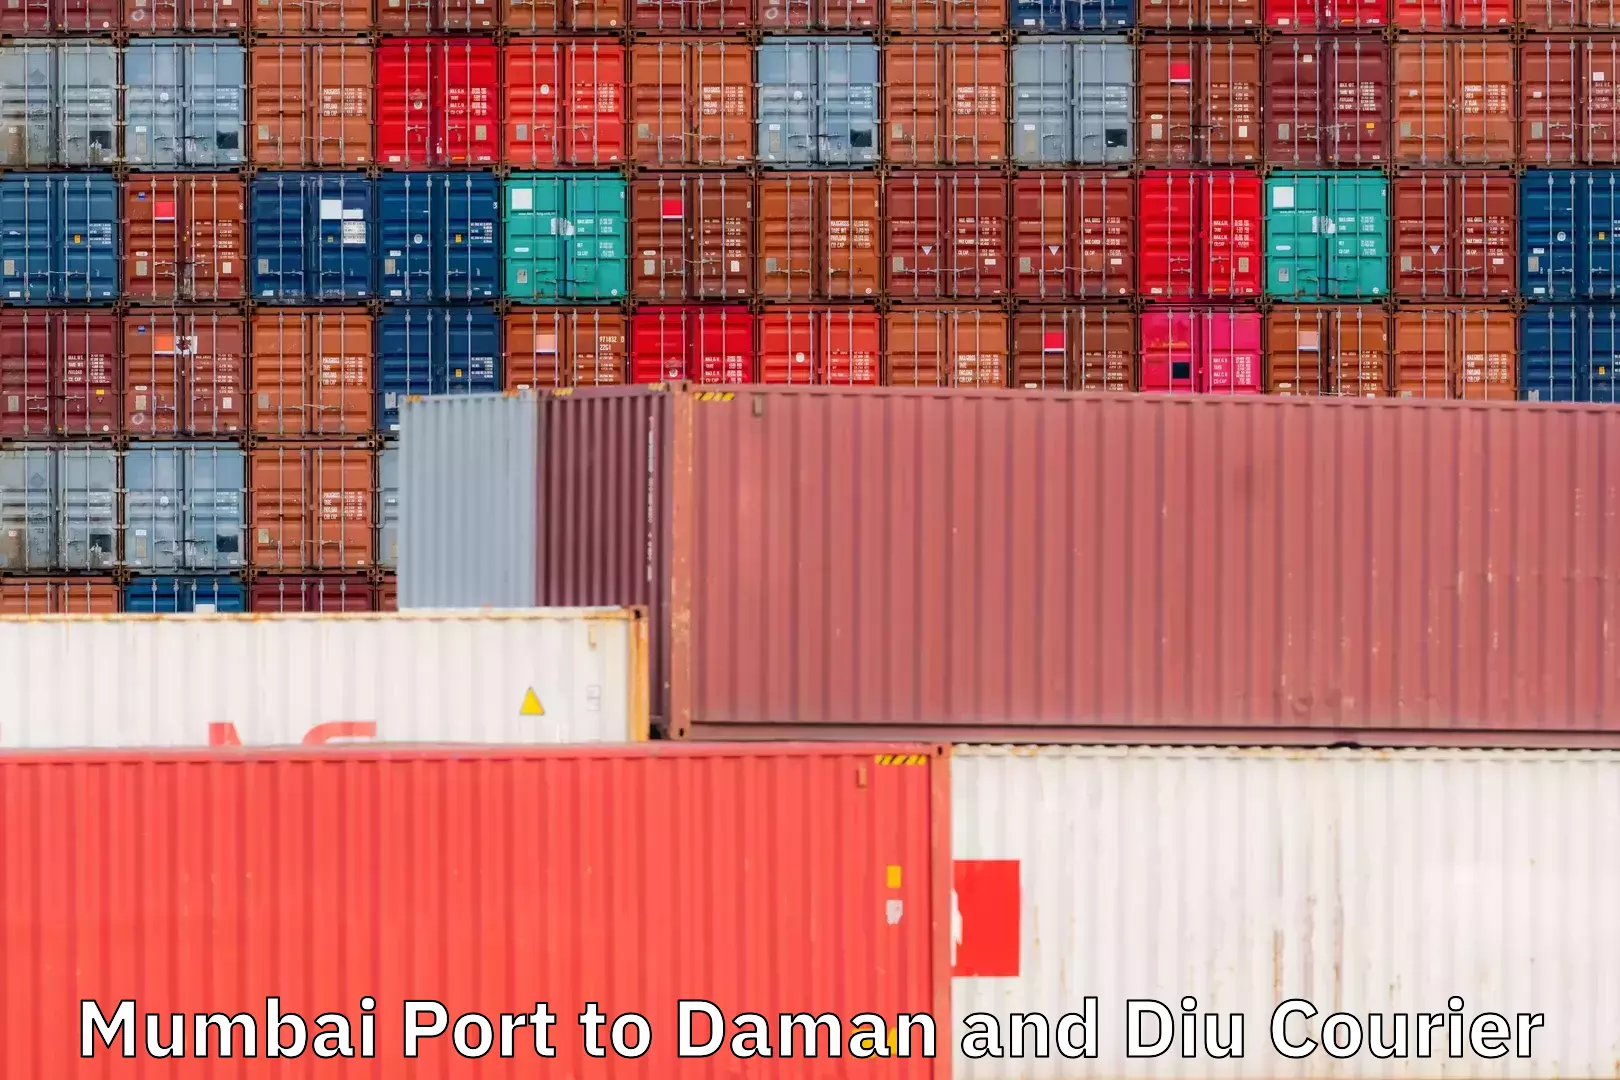 Wholesale parcel delivery Mumbai Port to Daman and Diu